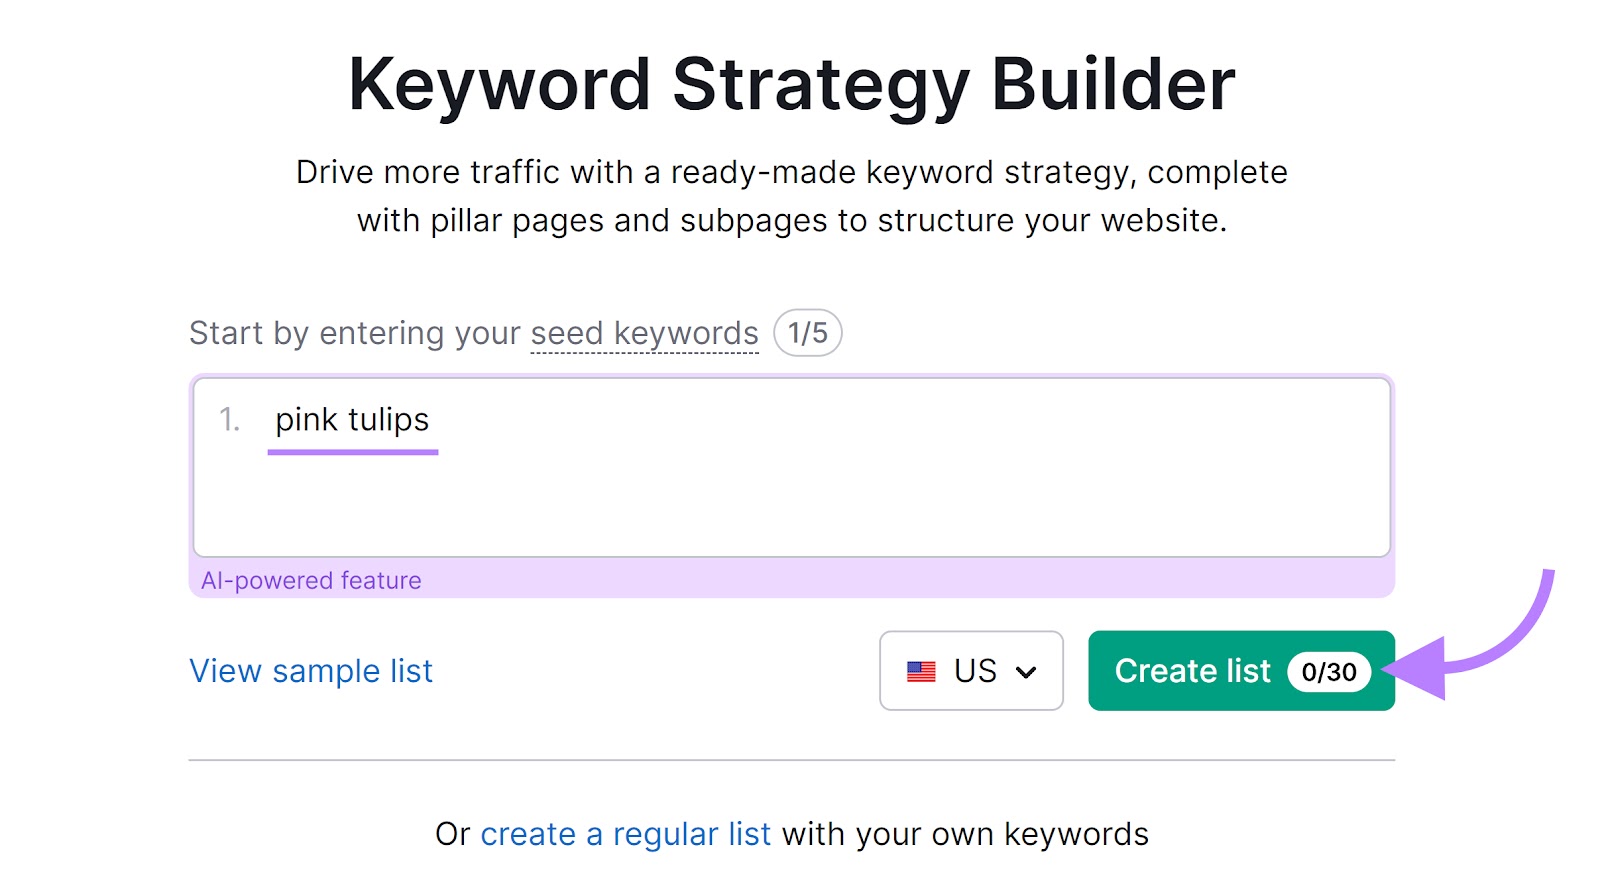 Keyword Strategy Builder tool with "pink tulips" in the text field and an arrow pointing to the "Create list" button.